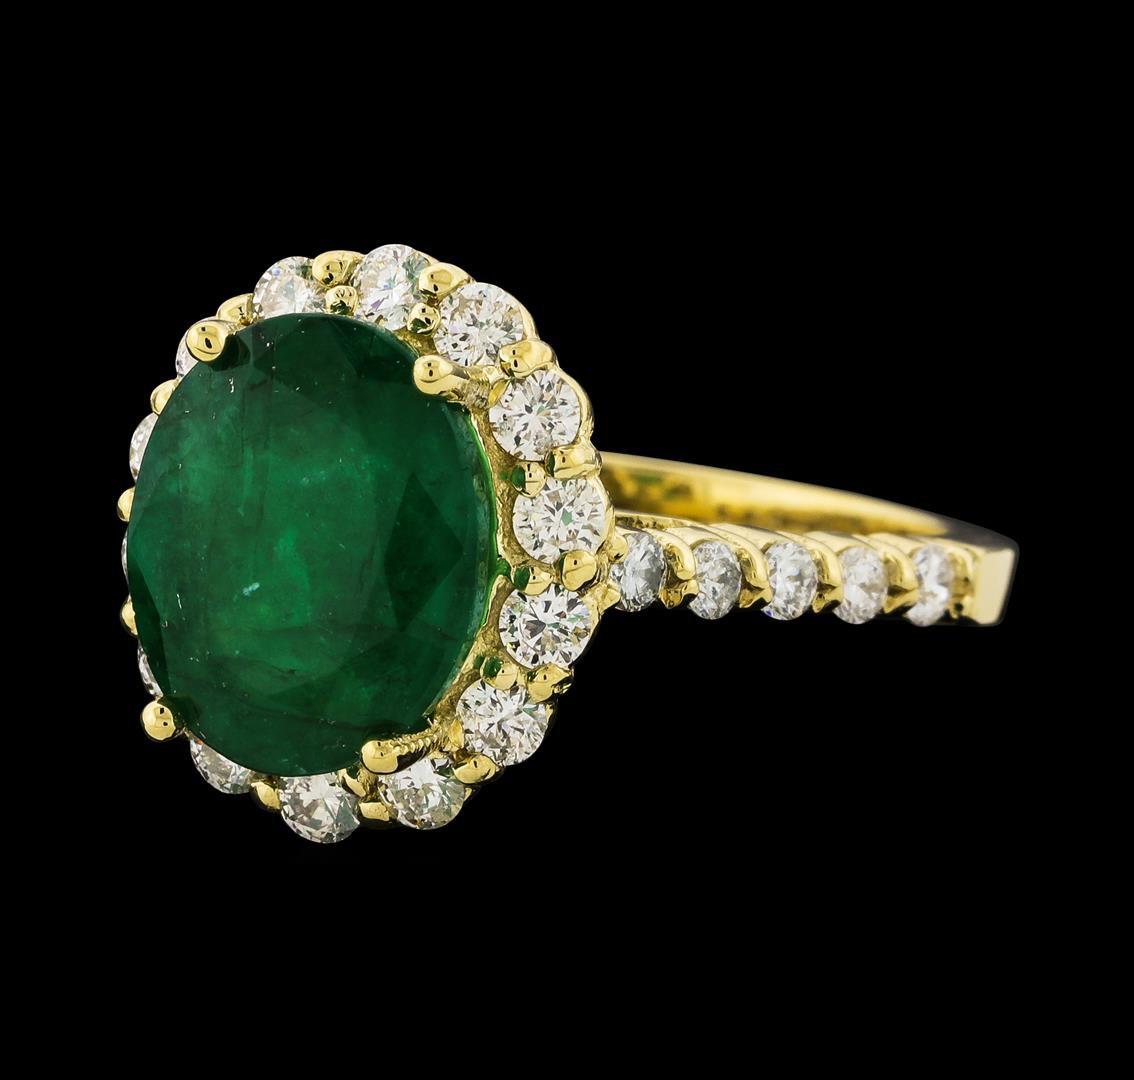 3.37 ctw Emerald and Diamond Ring - 14KT Yellow Gold